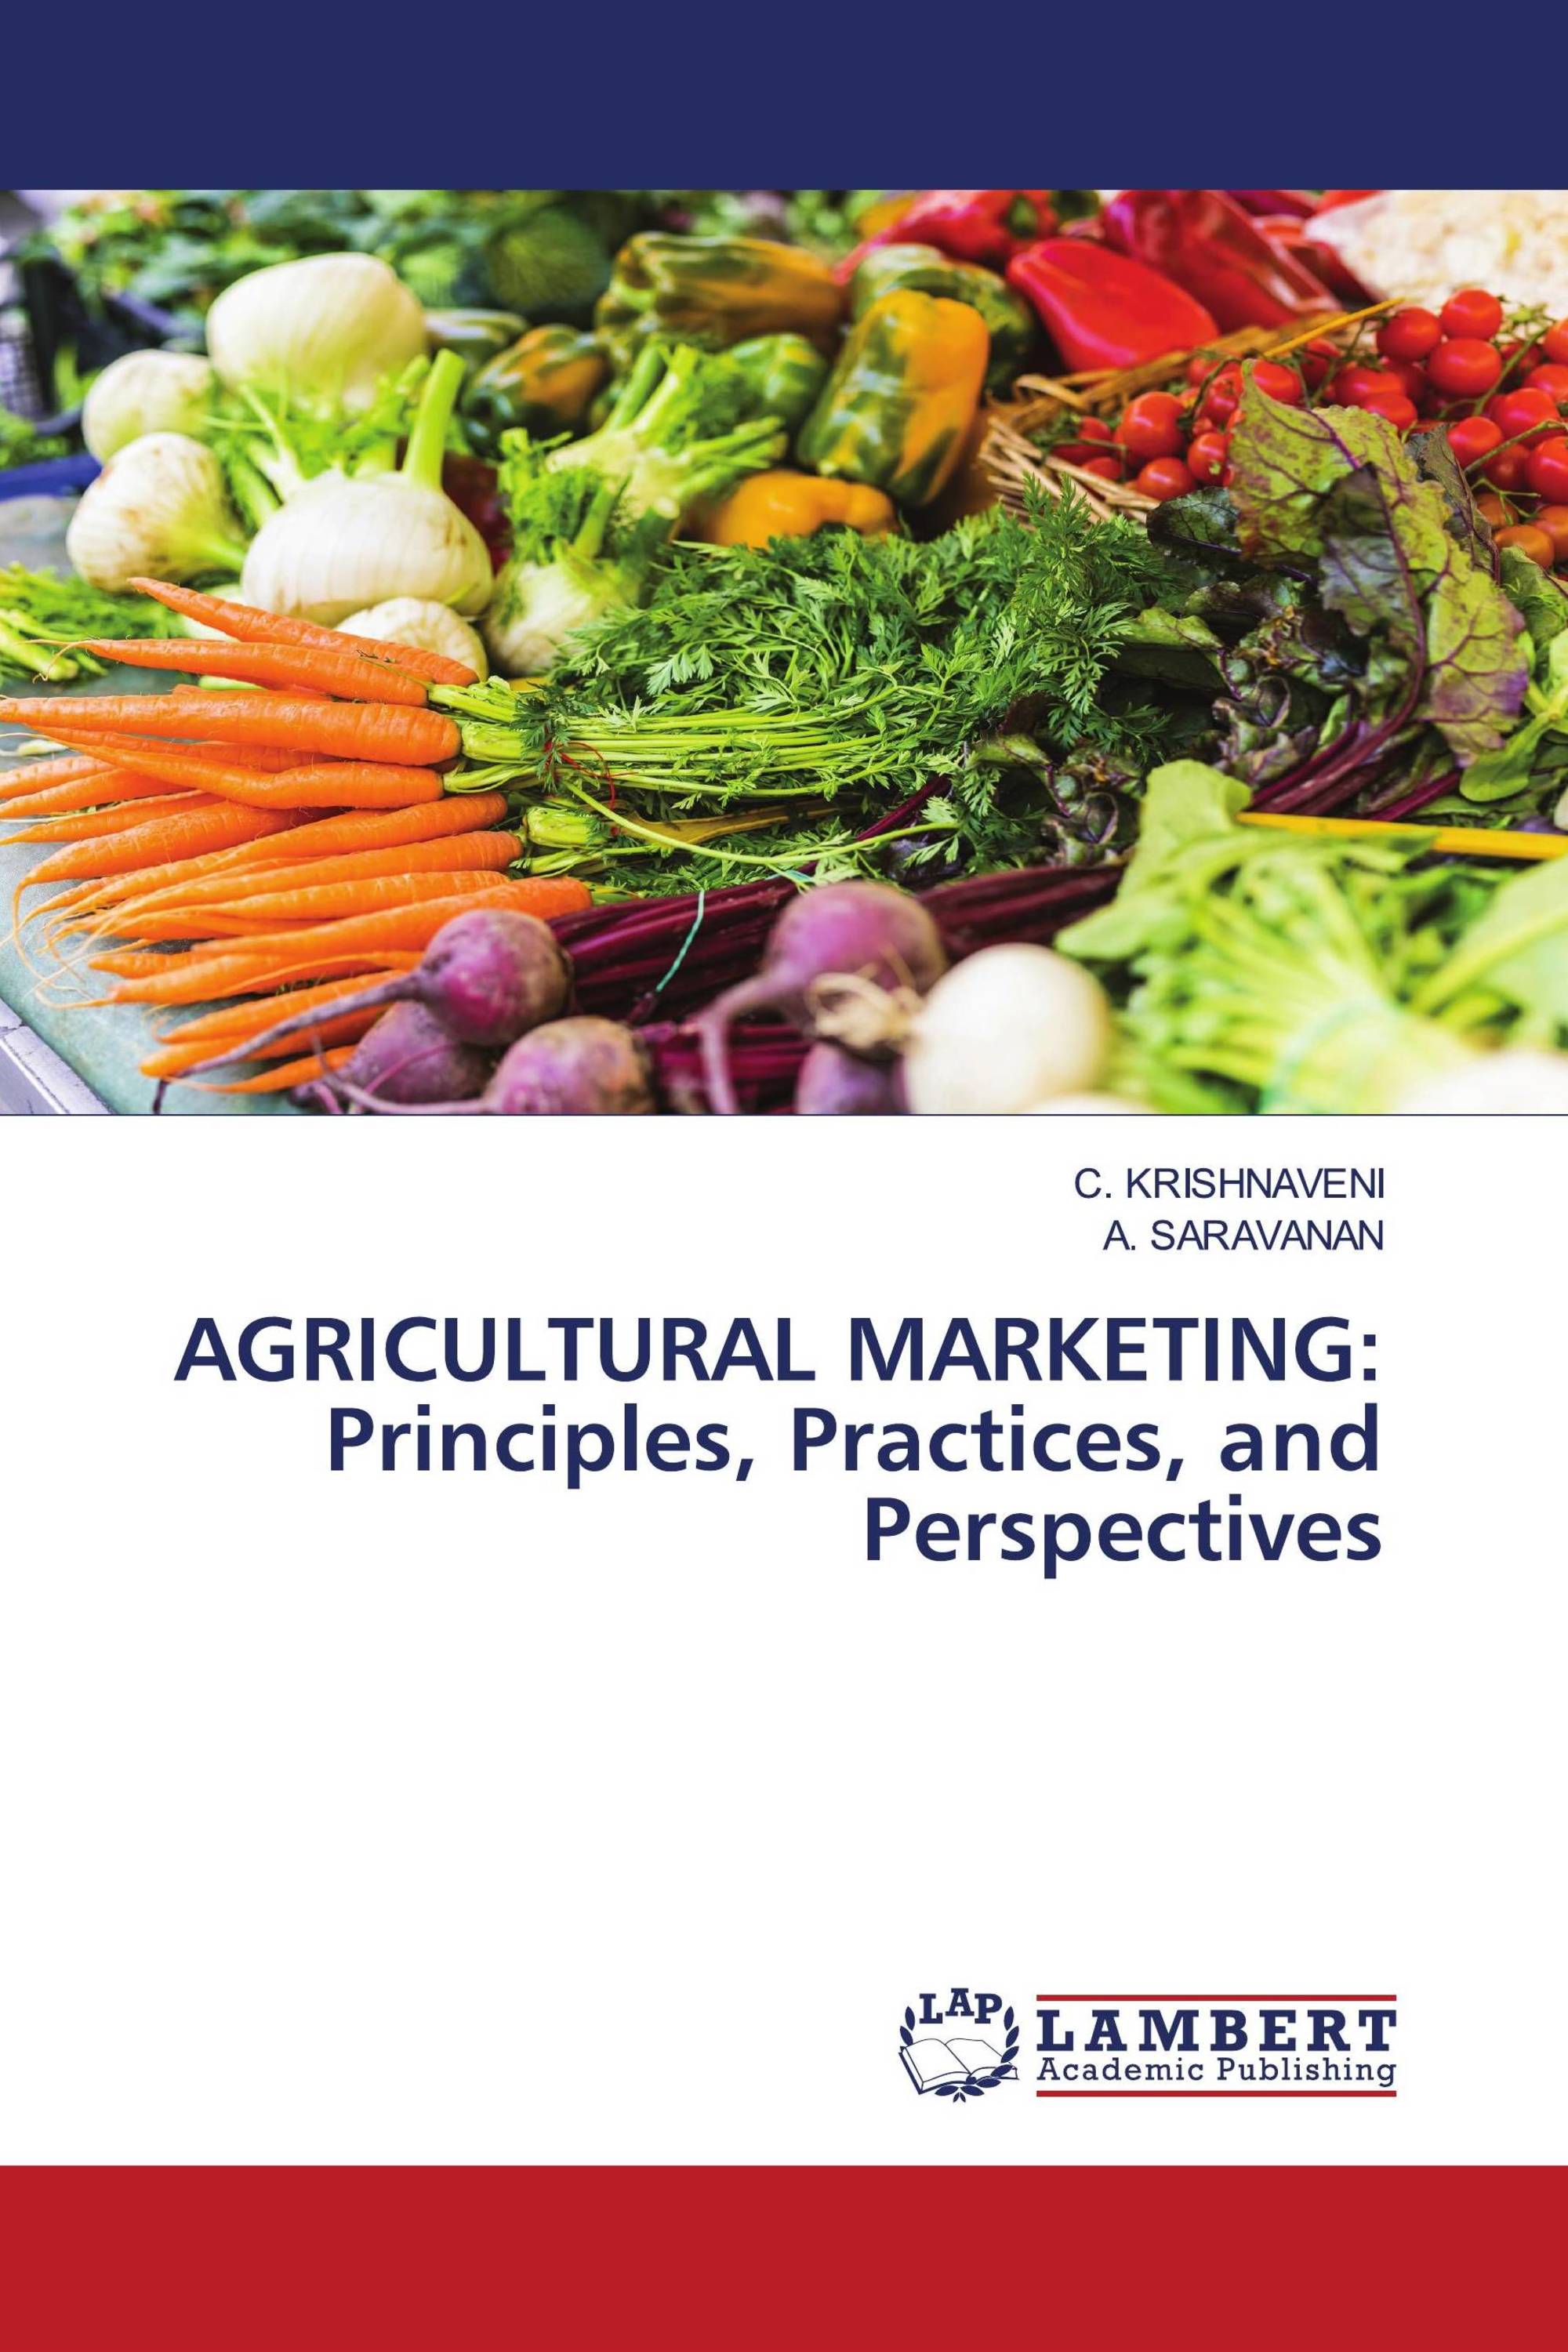 AGRICULTURAL MARKETING: Principles, Practices, and Perspectives